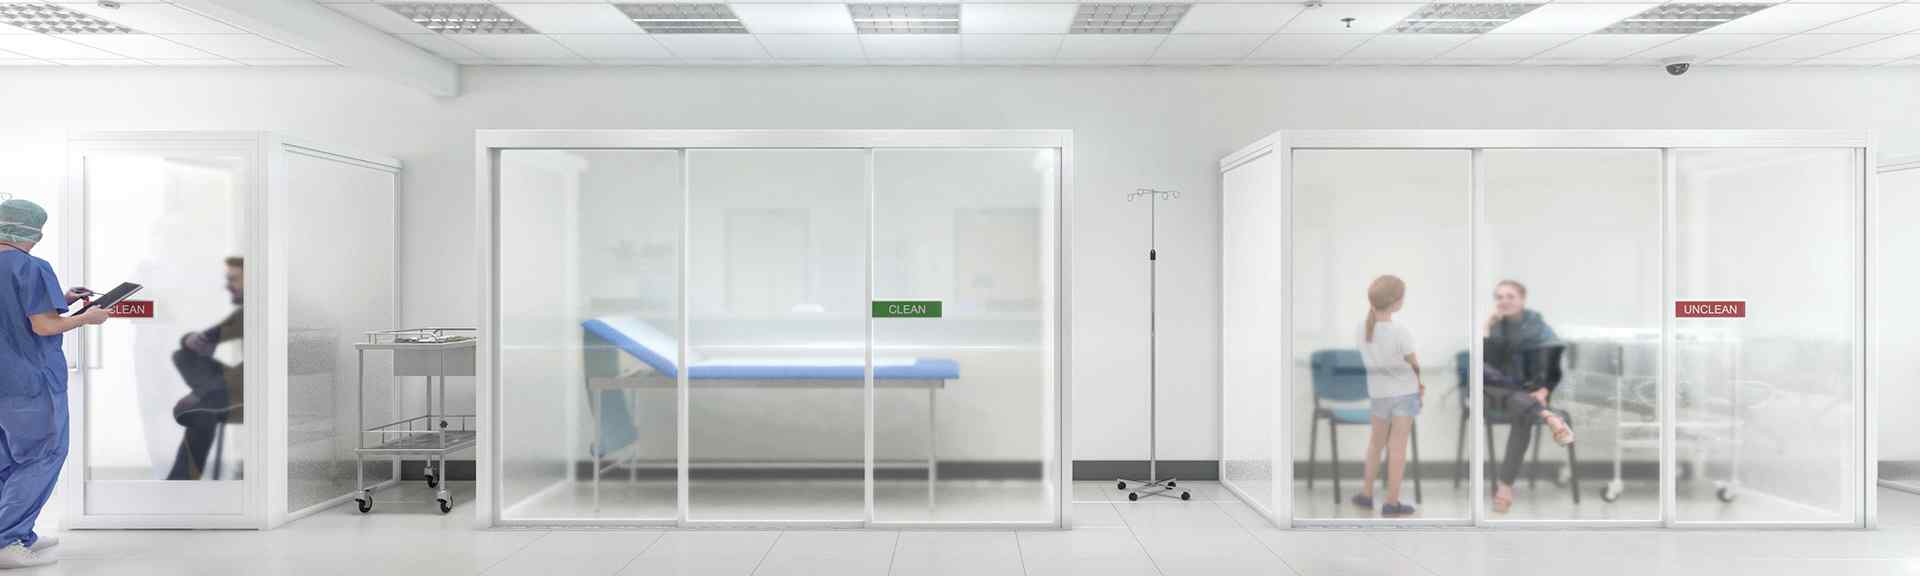 wellness glass walls with doctors in office quarantine room